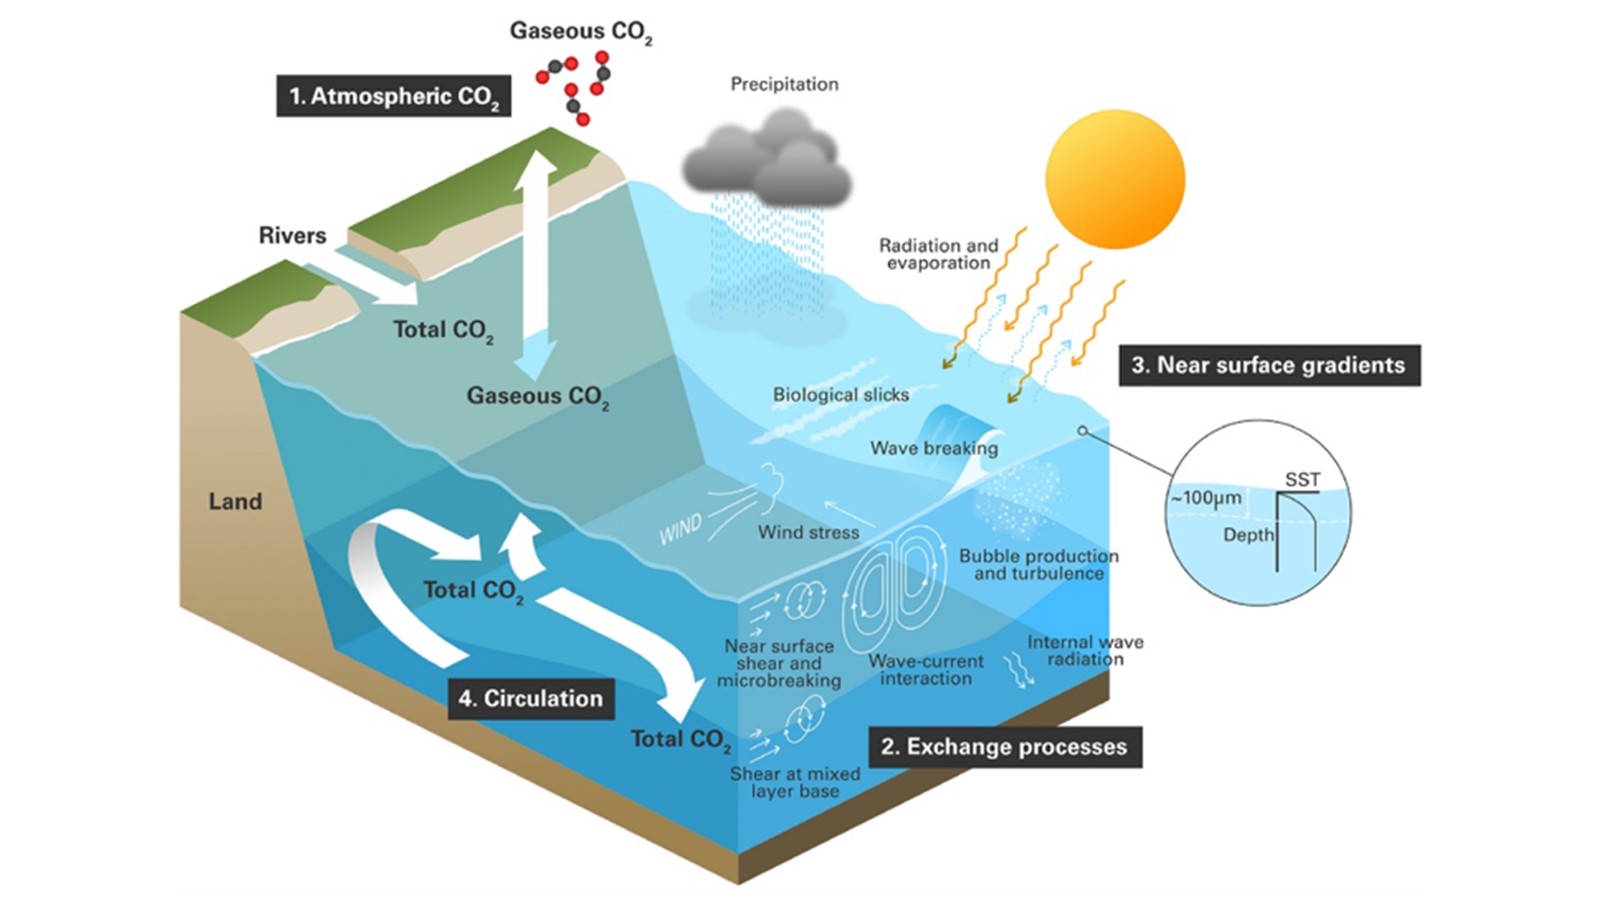 Diagram that shows the interactions, exchange, and circulation of carbon dioxide within the ocean, identifying where satellite-based Earth observations are likely to play a leading role in expanding understanding and capability: (1) atmospheric measurements at the ocean surface; (2) quantifying gas, momentum, and heat atmosphere–ocean exchange processes; (3) capturing near-surface gradients in the water; and (4) measuring internal circulation and surface transport. Image from Frontiers in Ecology and the Environment.